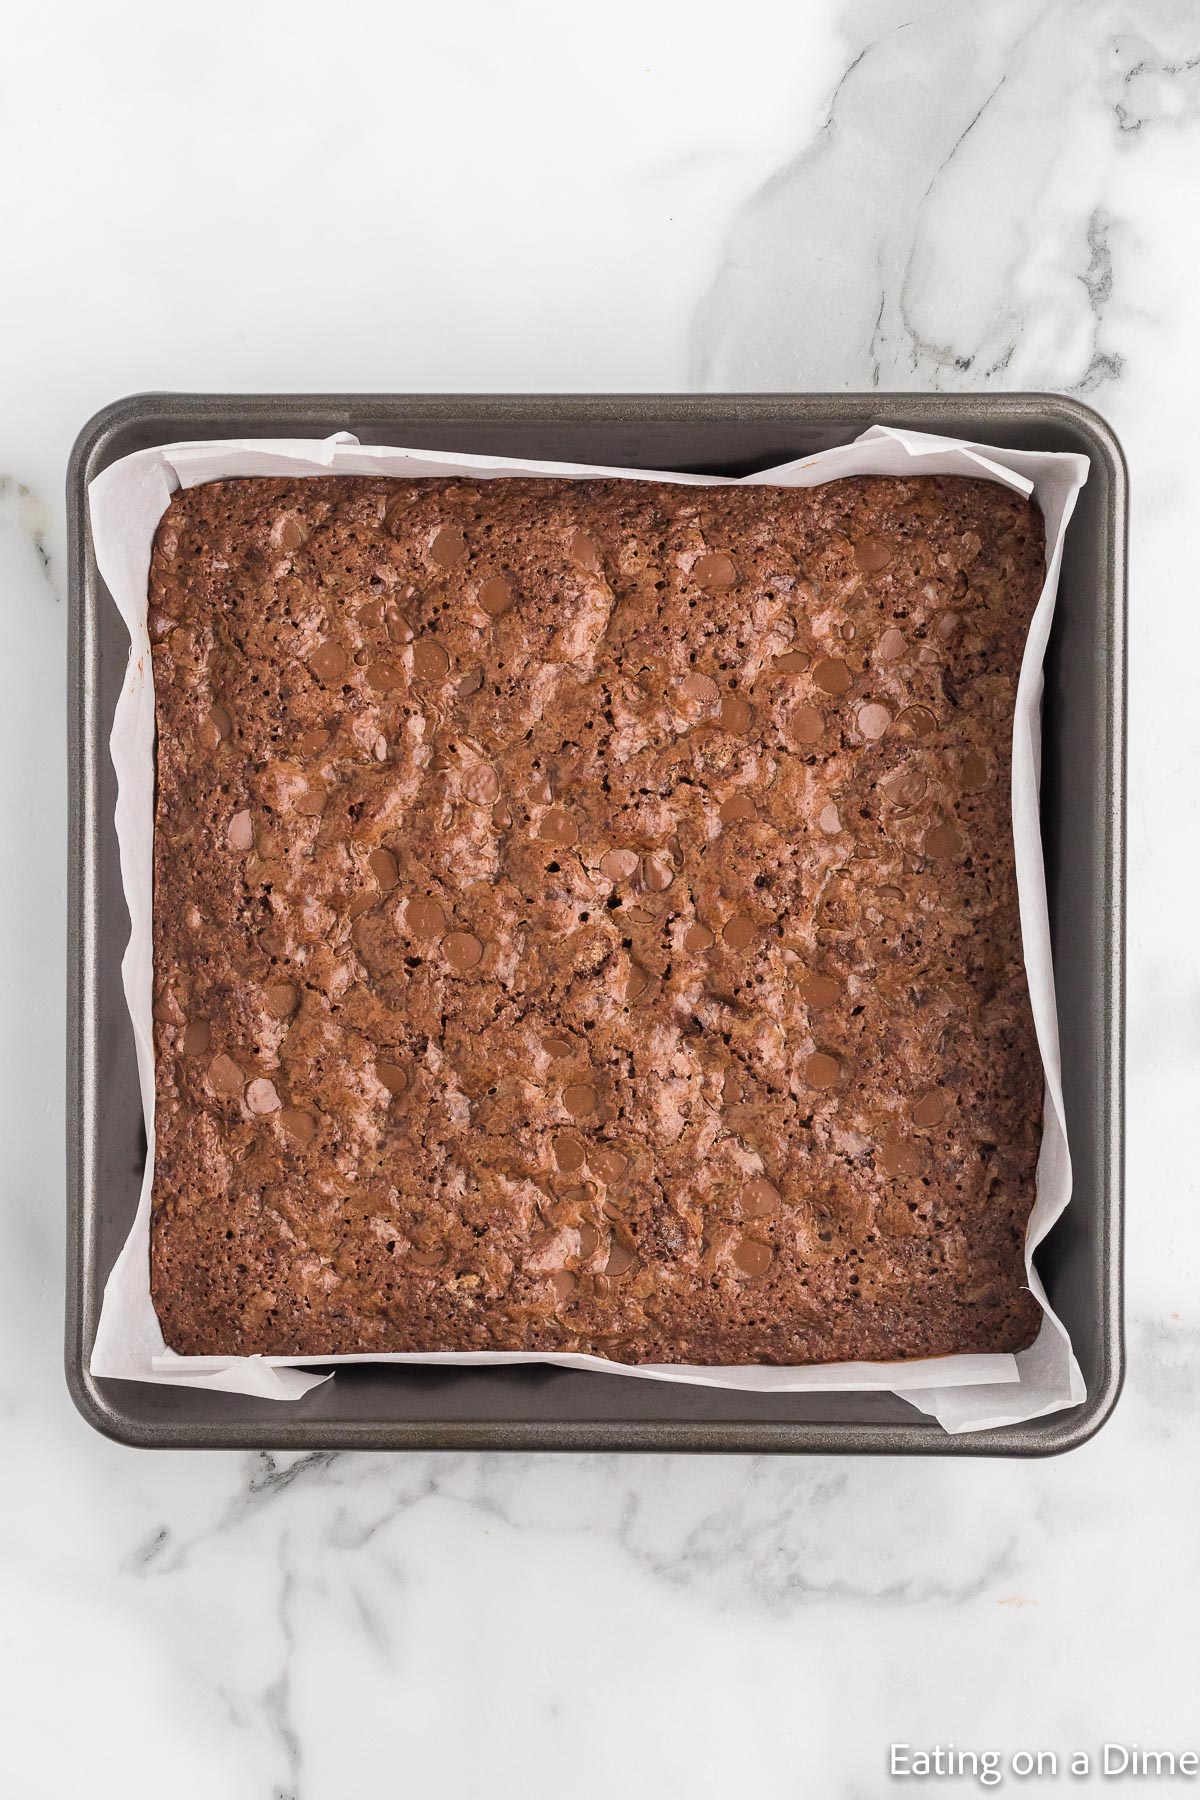 Baked Brownie in a baking dish